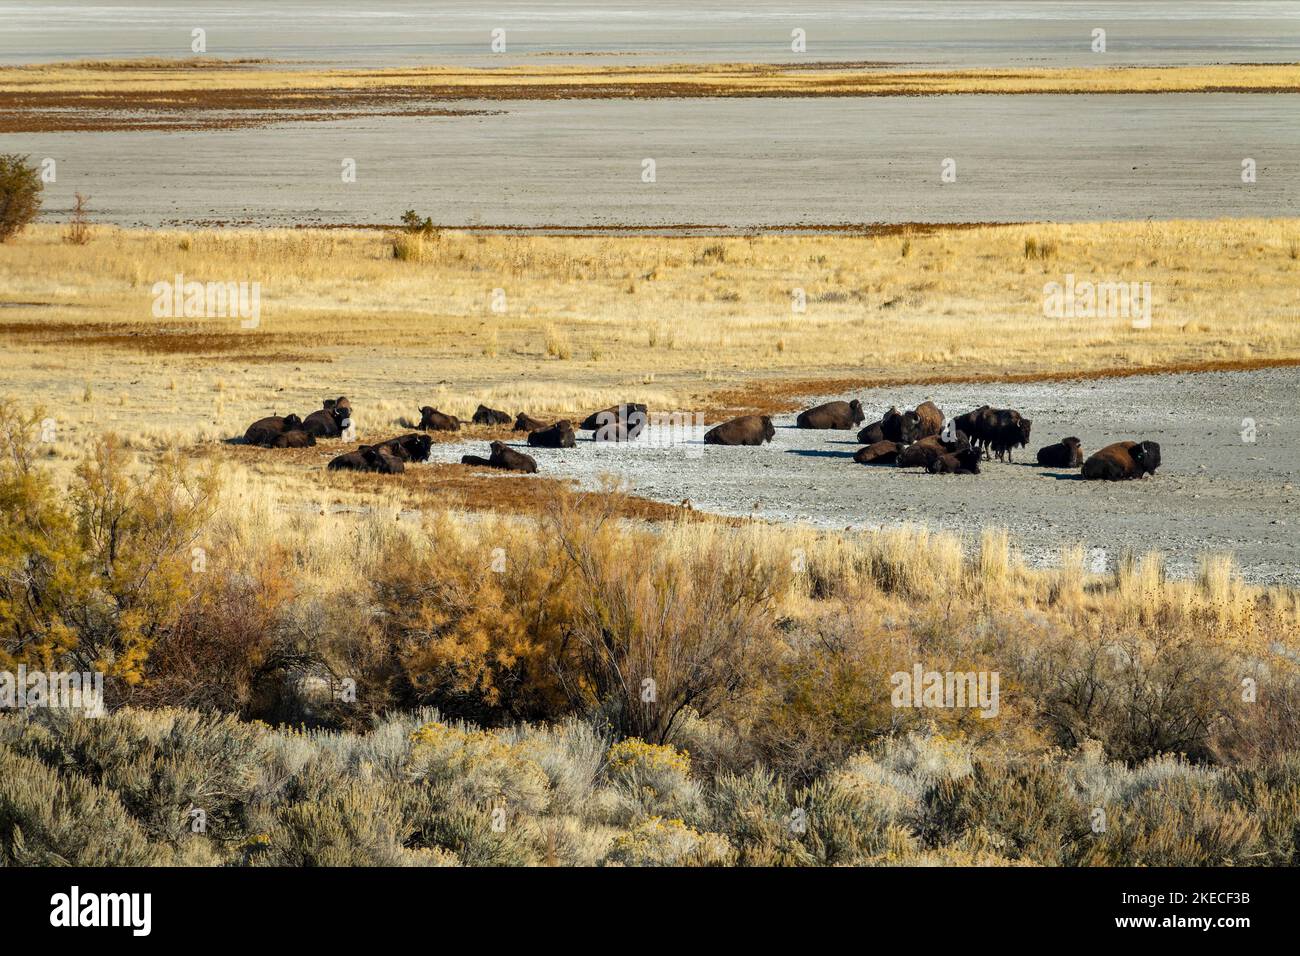 Bisons in Antelope Island State Park. On February 15, 1893, 12 bison were brought to the island, and today the bison herd consists of 500 - 700 animals Stock Photo